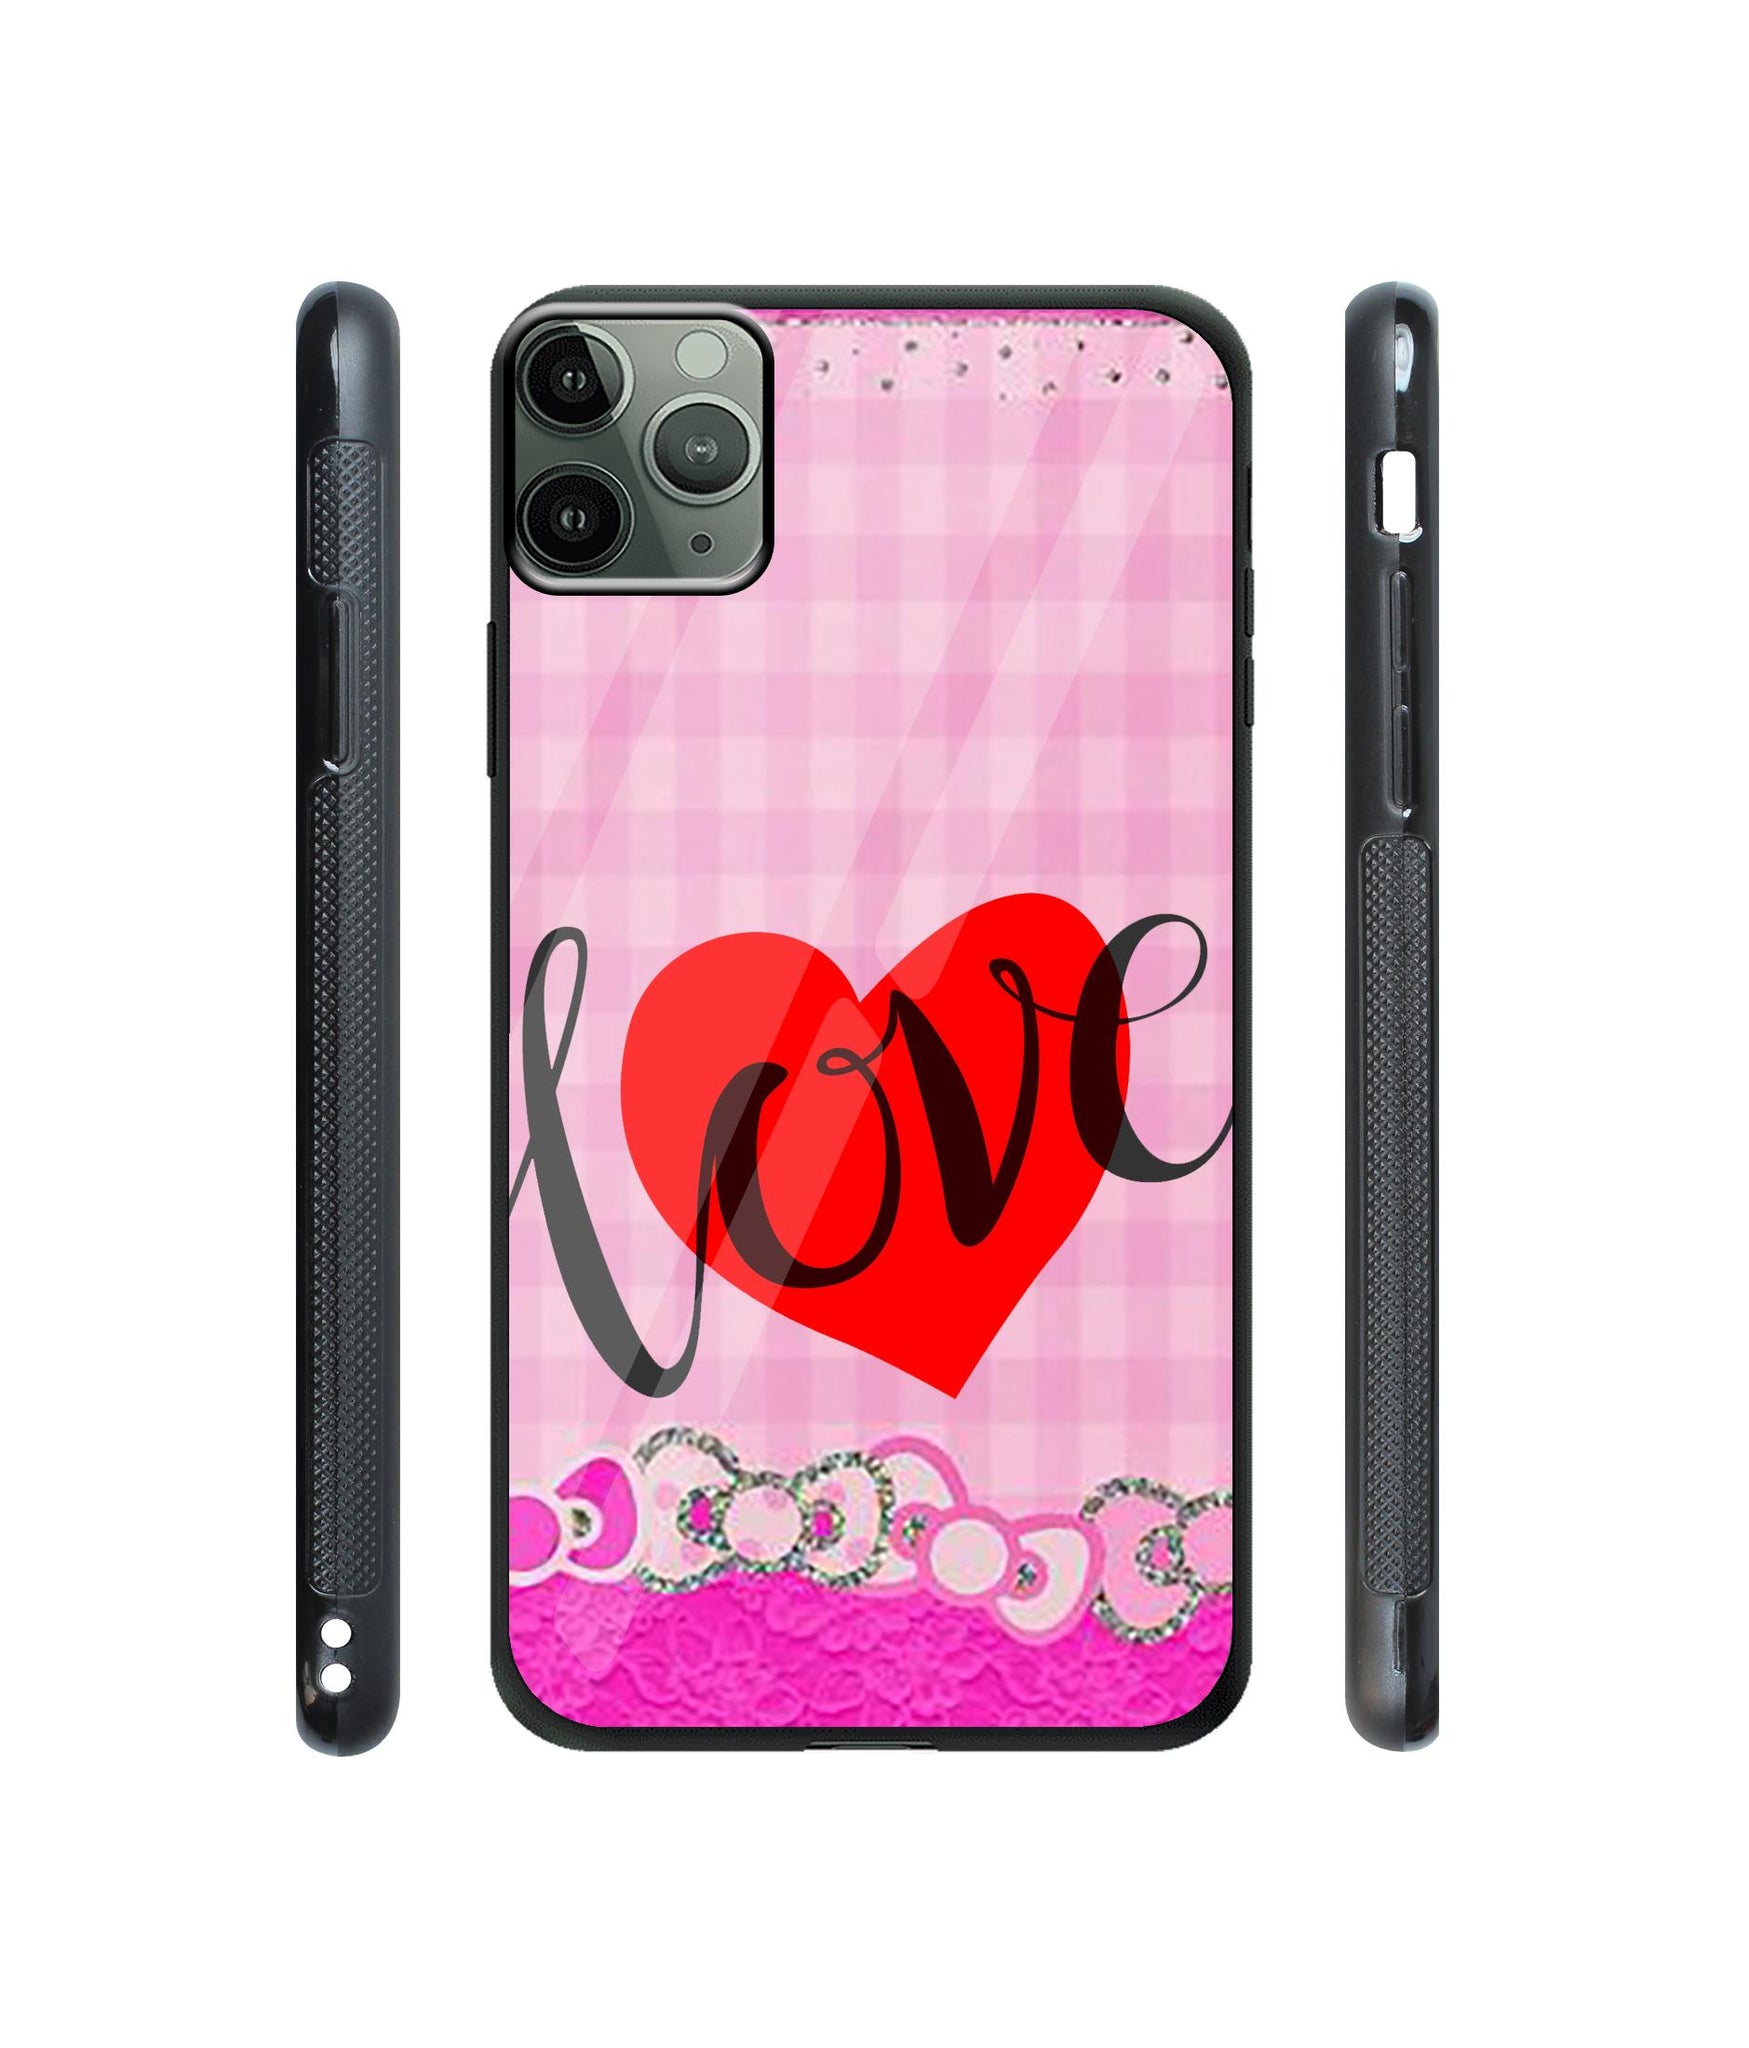 Love Print On Cloth Designer Printed Glass Cover for Apple iPhone 11 Pro Max